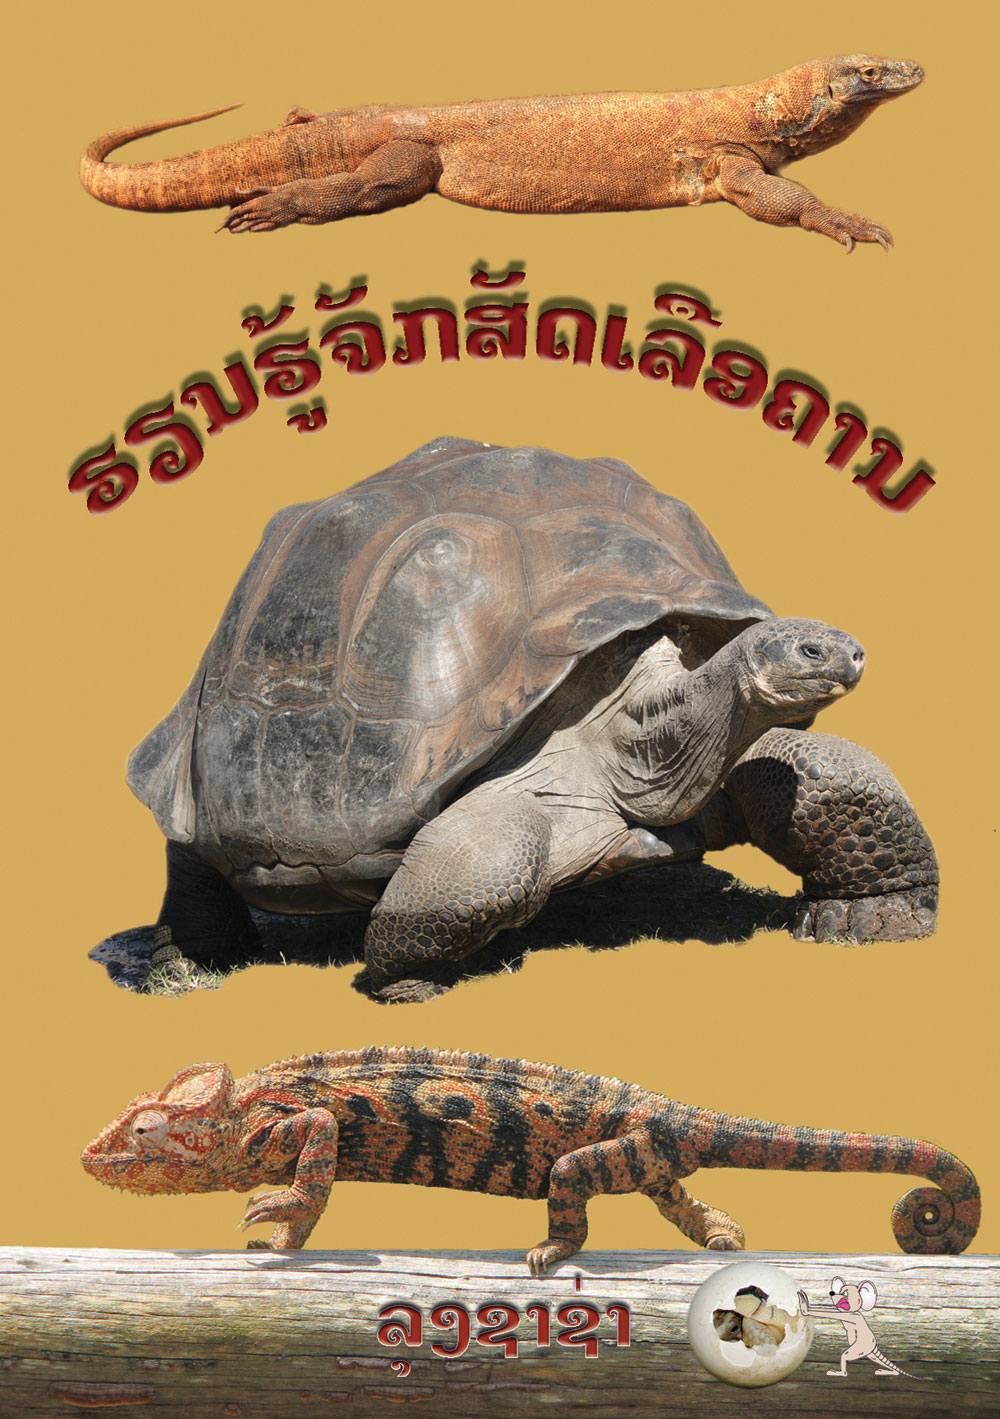 Reptiles large book cover, published in 